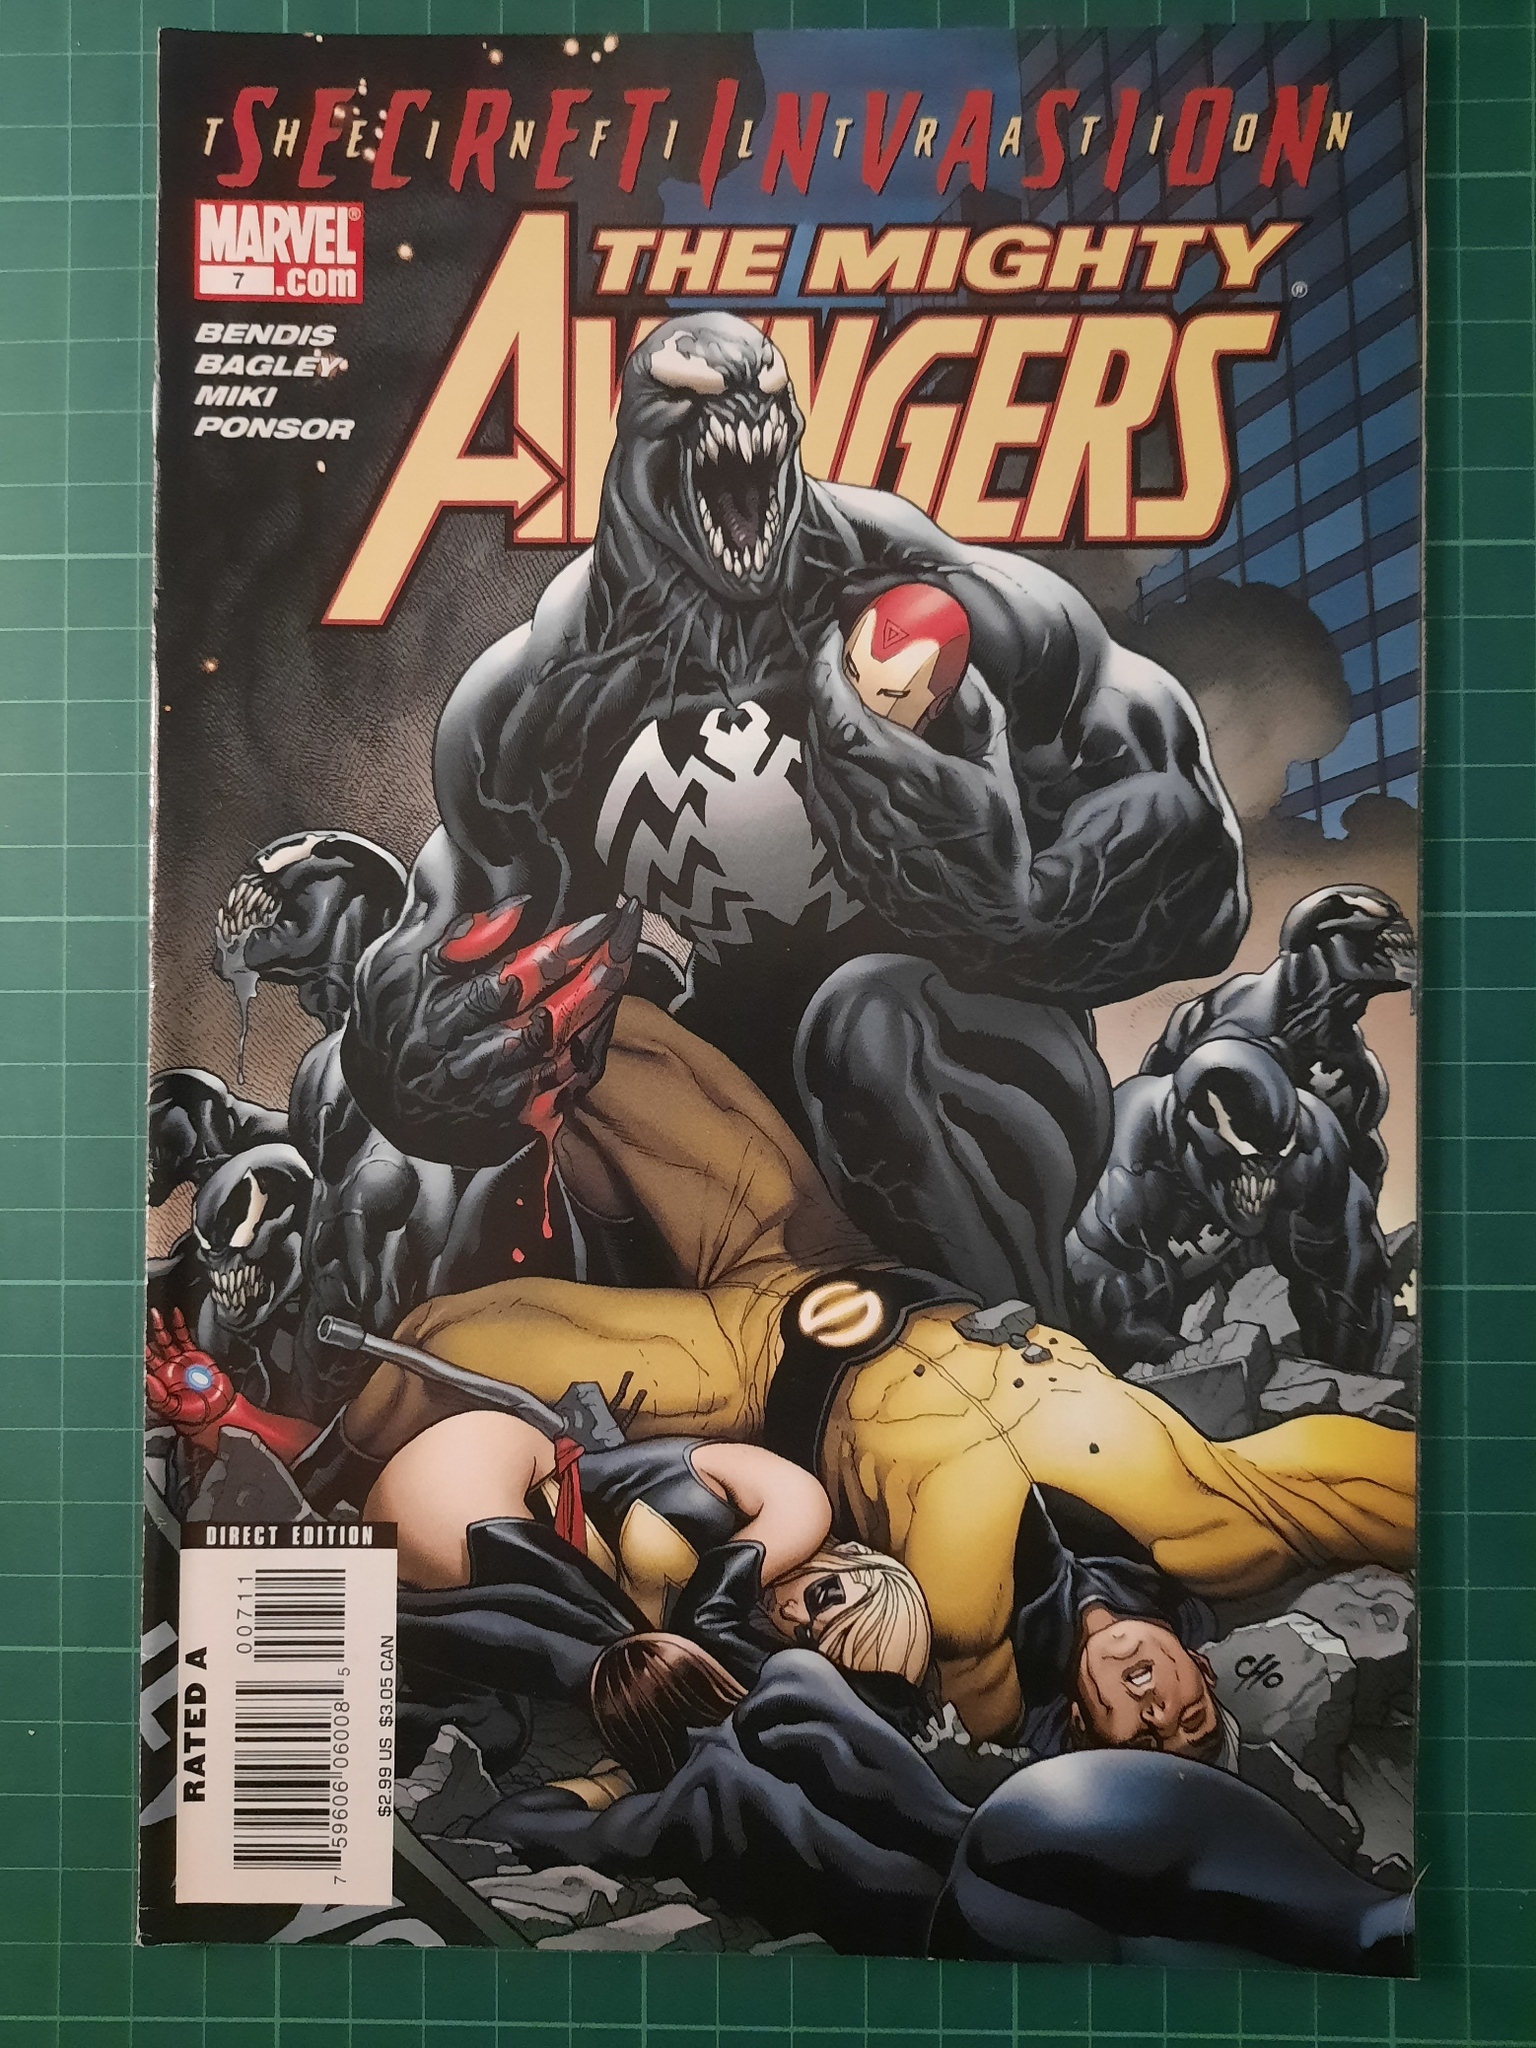 The mighty Avengers #07